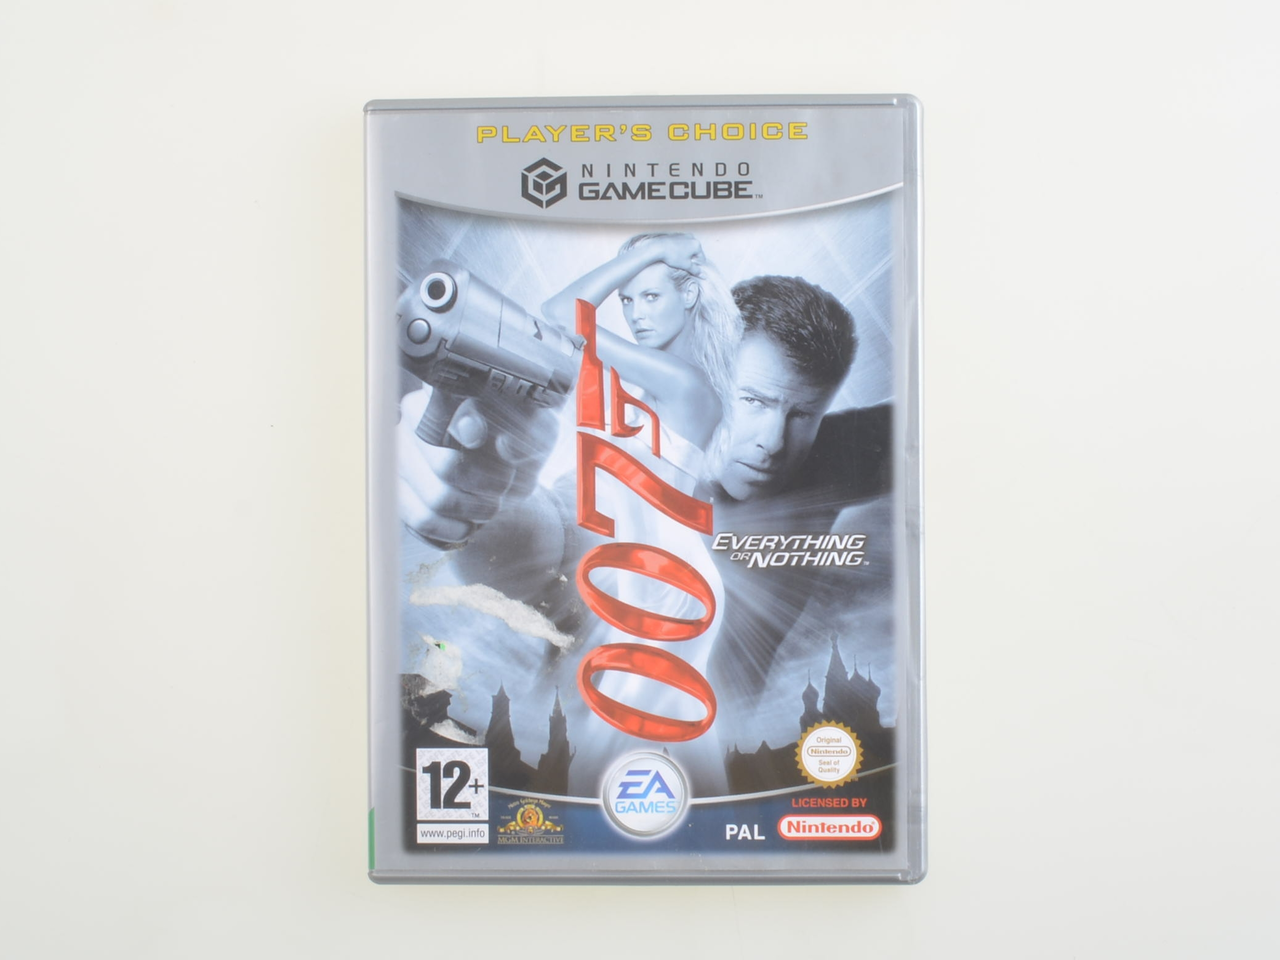 James Bond 007: Everything or Nothing (Player's Choice) Kopen | Gamecube Games